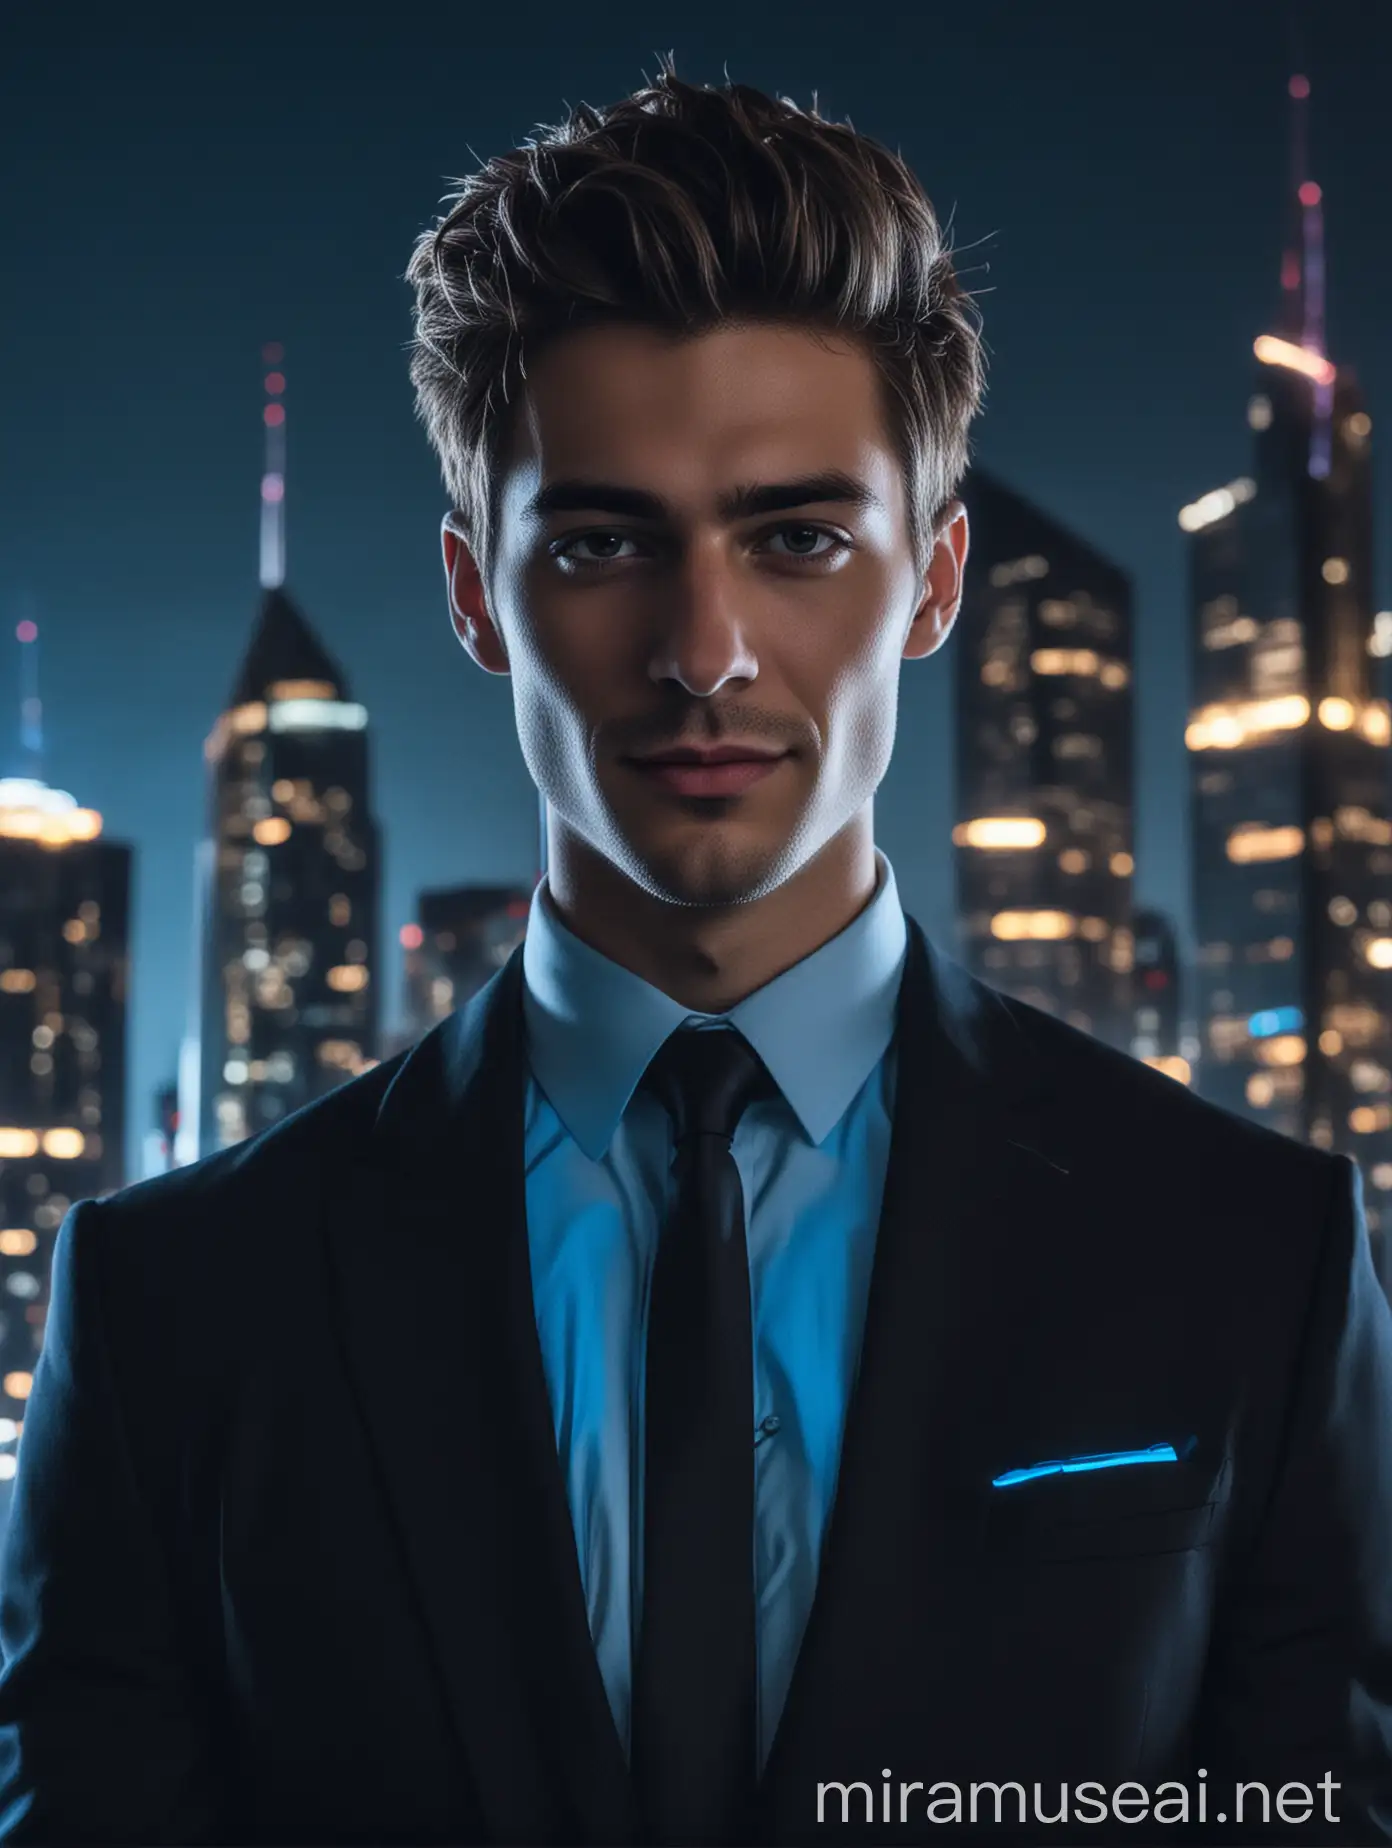 Stylish Young Man in Suit with Glowing Power Against Urban Night Skyline